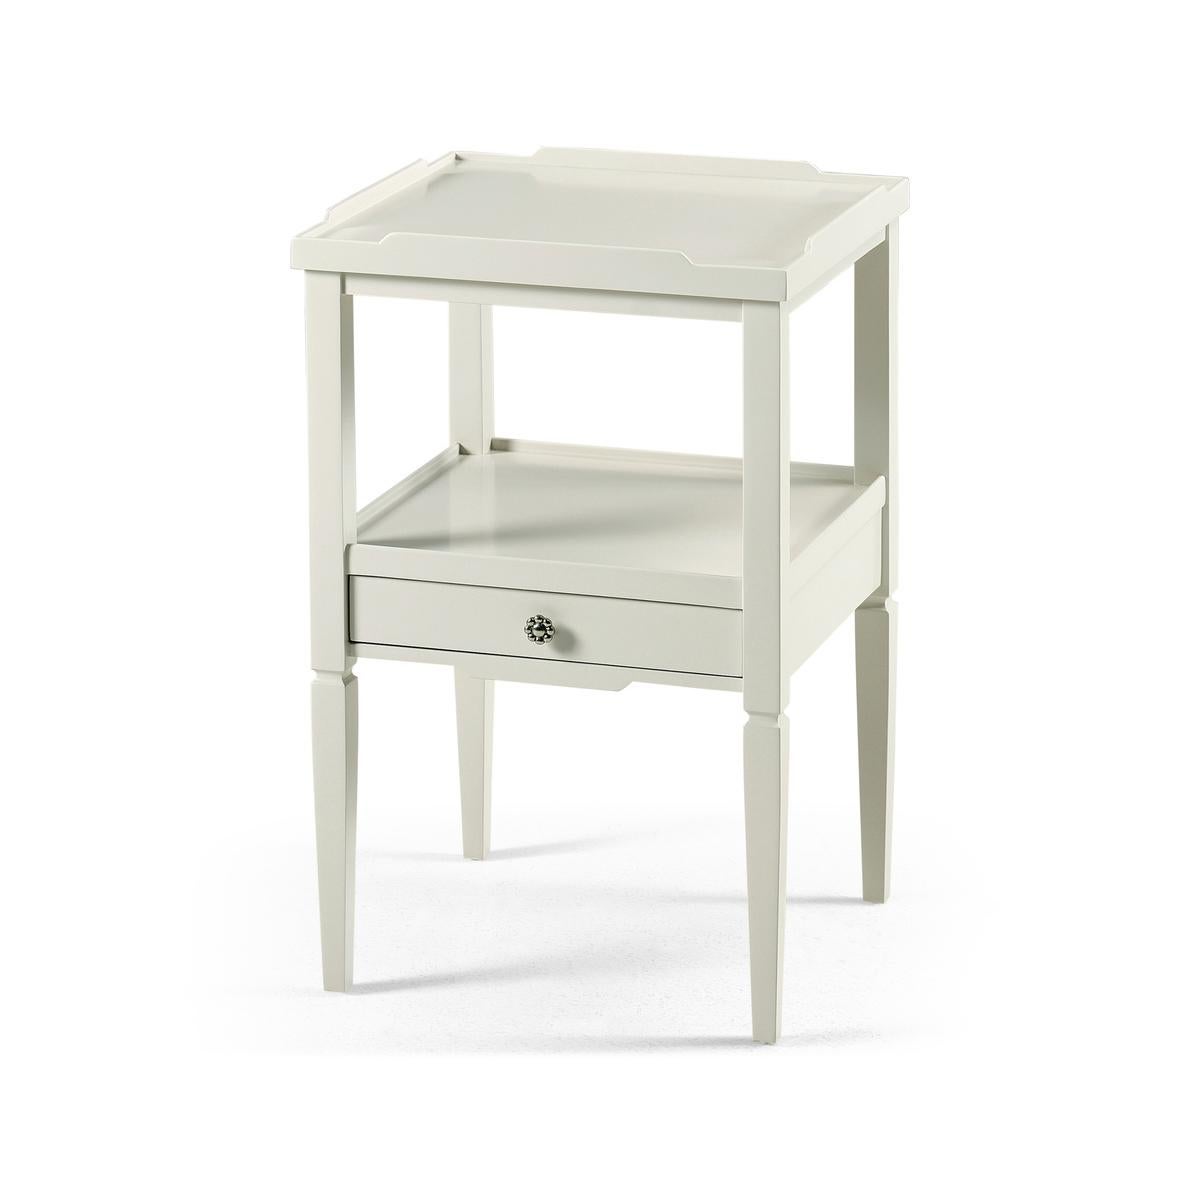 Country painted two tier end table, with a galleried top and a lower drawer shelf lined with a blue and white print. With custom cast hardware and square tapered legs.

Dimensions: 16